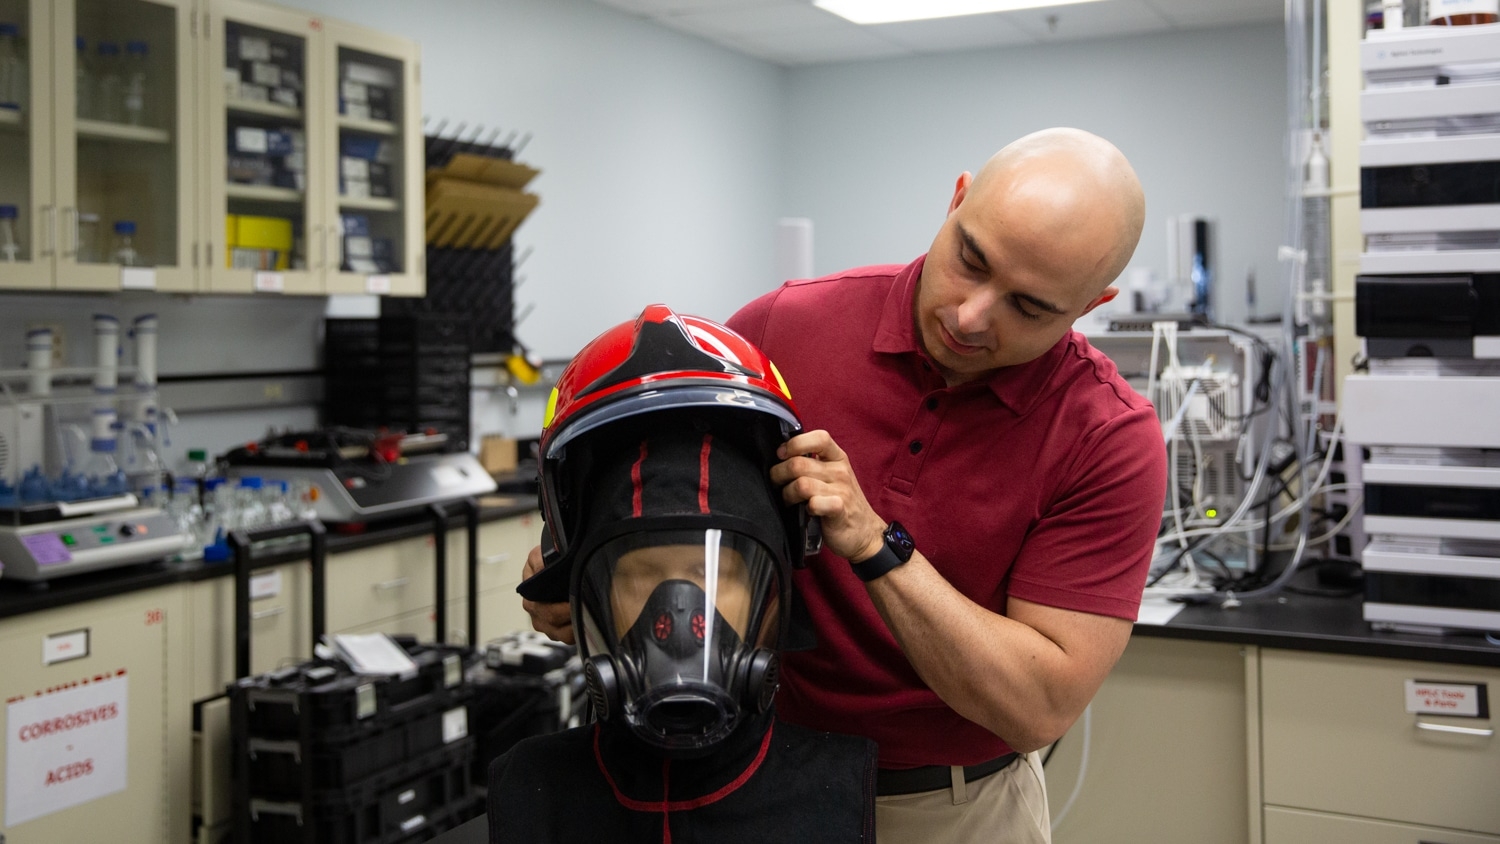 Arash Kasebi adjusts a firefighter helmet and hood on a mannequin head in a lab at the Wilson College of Textiles.